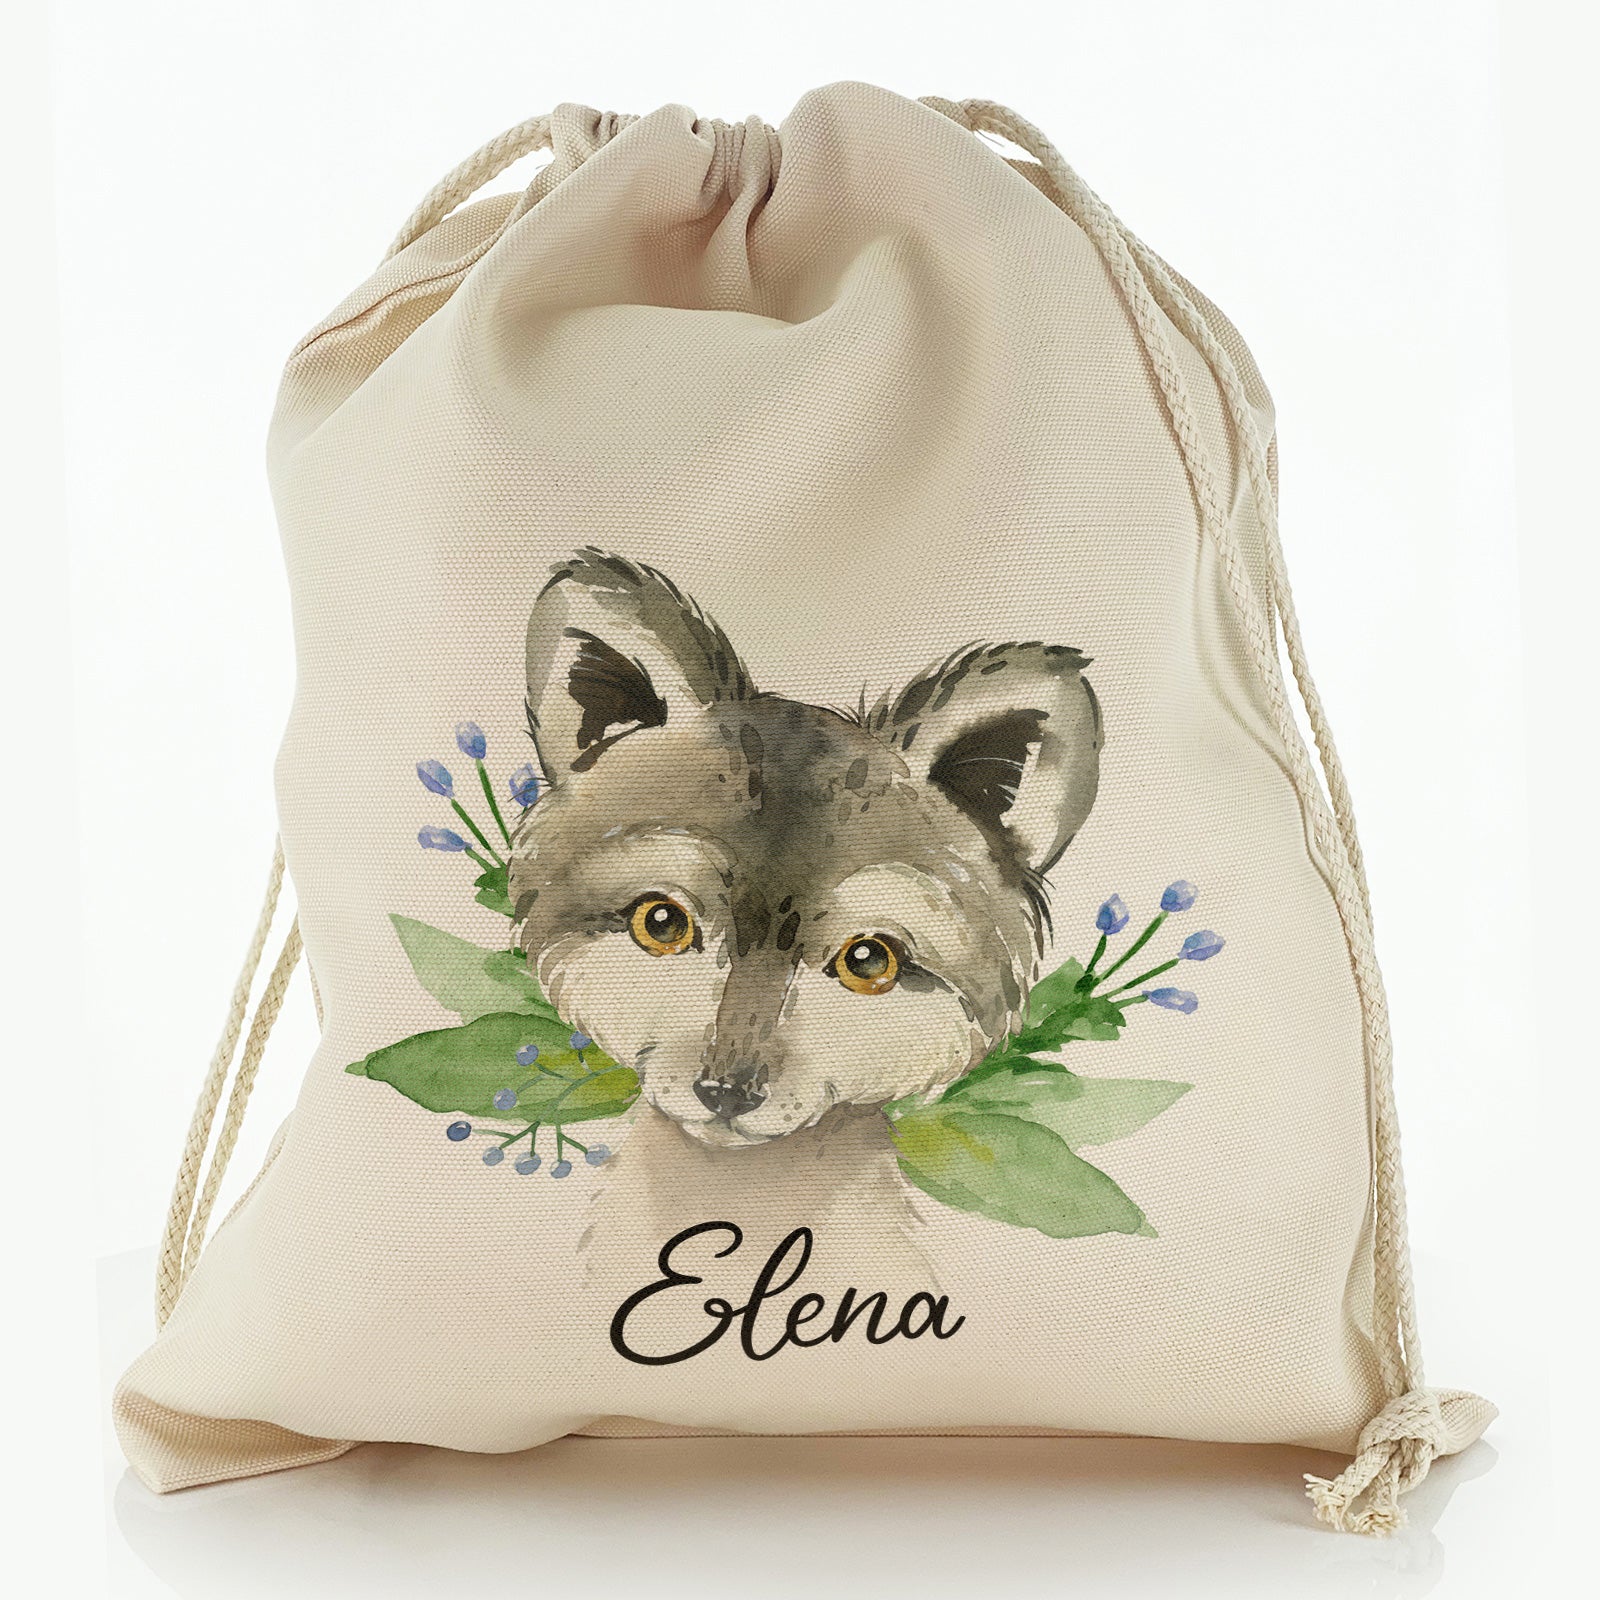 Personalised Canvas Sack with Grey Wolf Blue Flowers and Cute Text